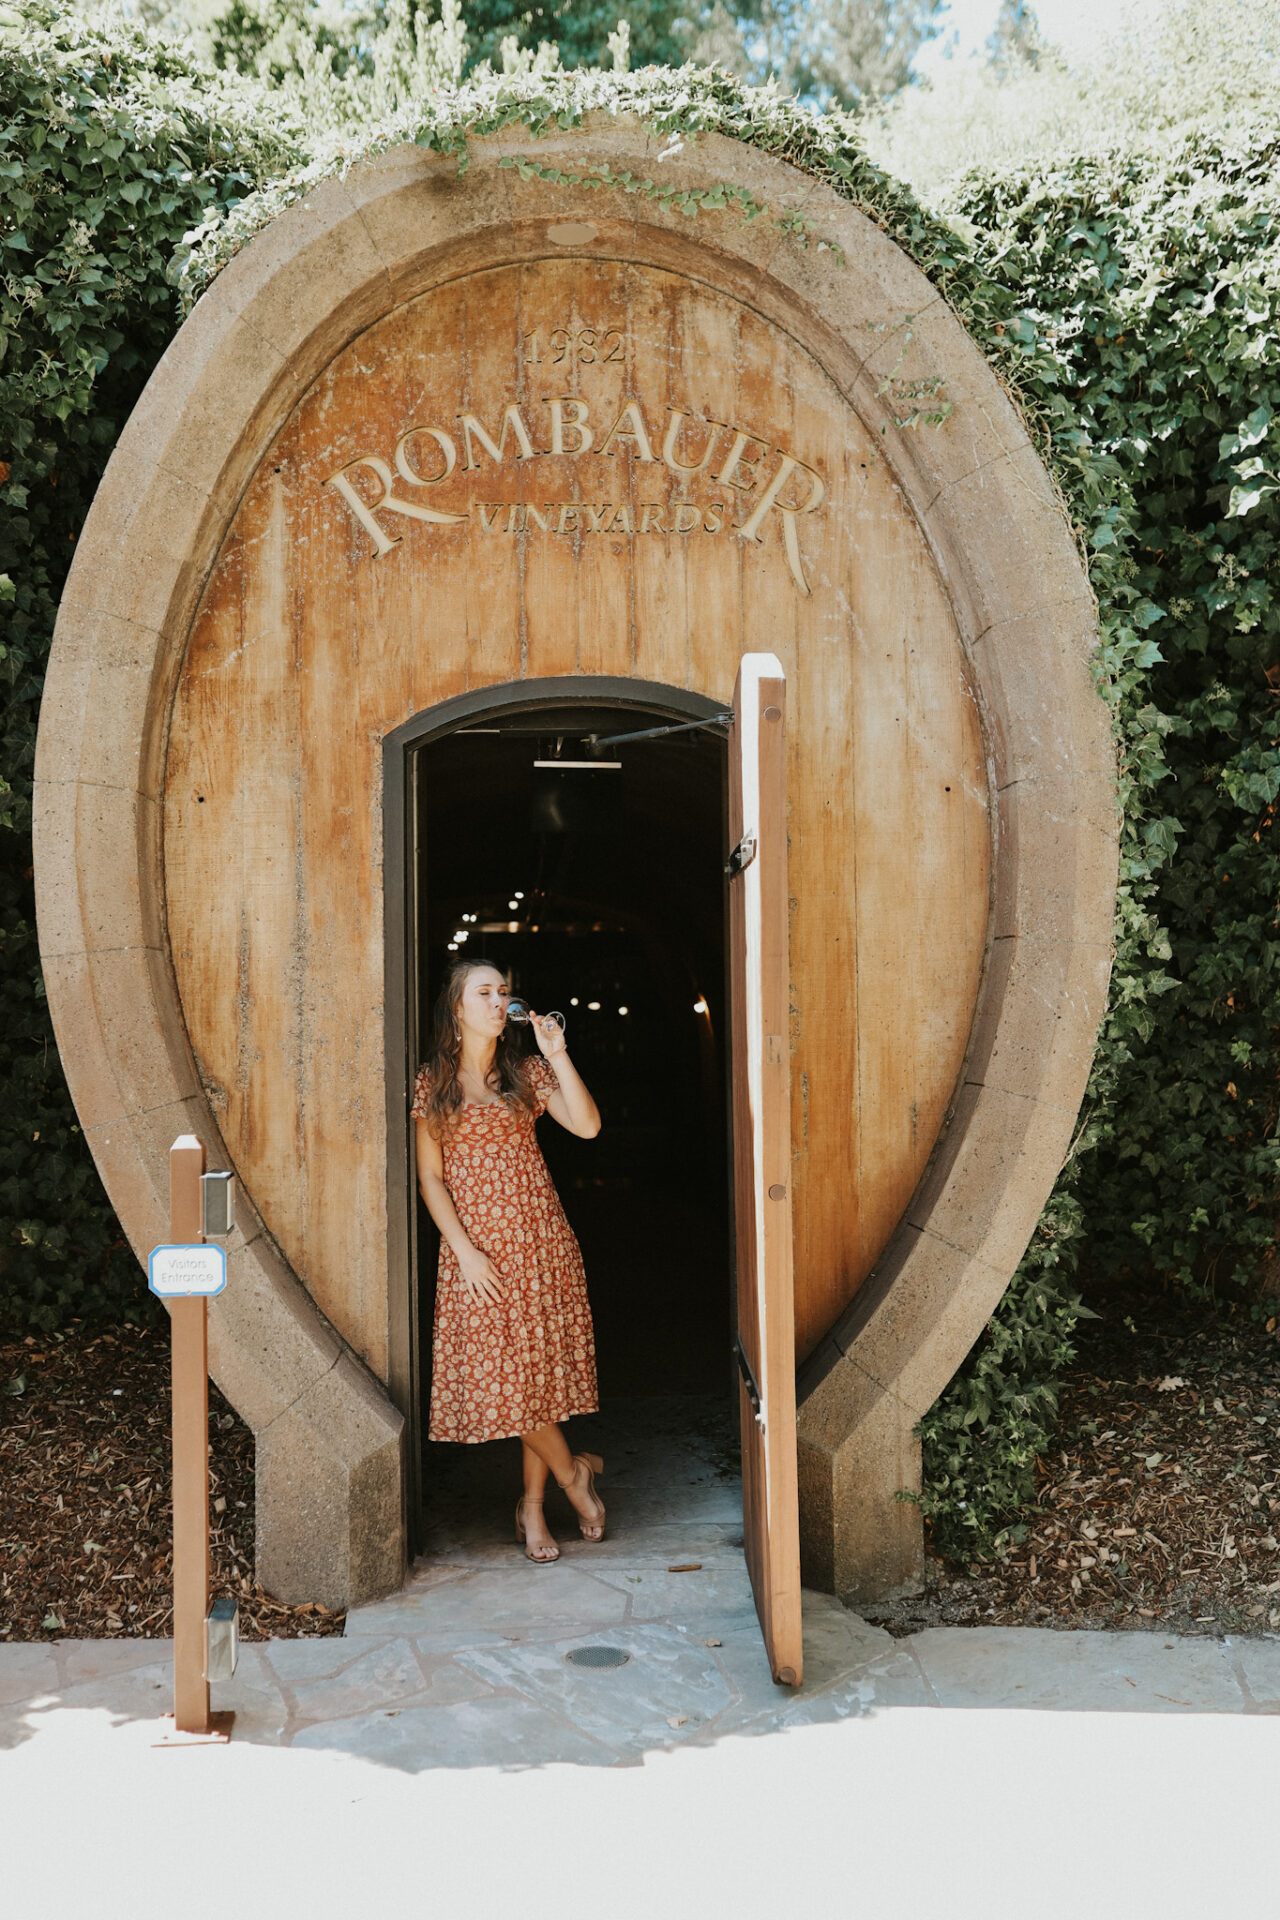 Paige in the wine cave at Rombauer winery in Napa